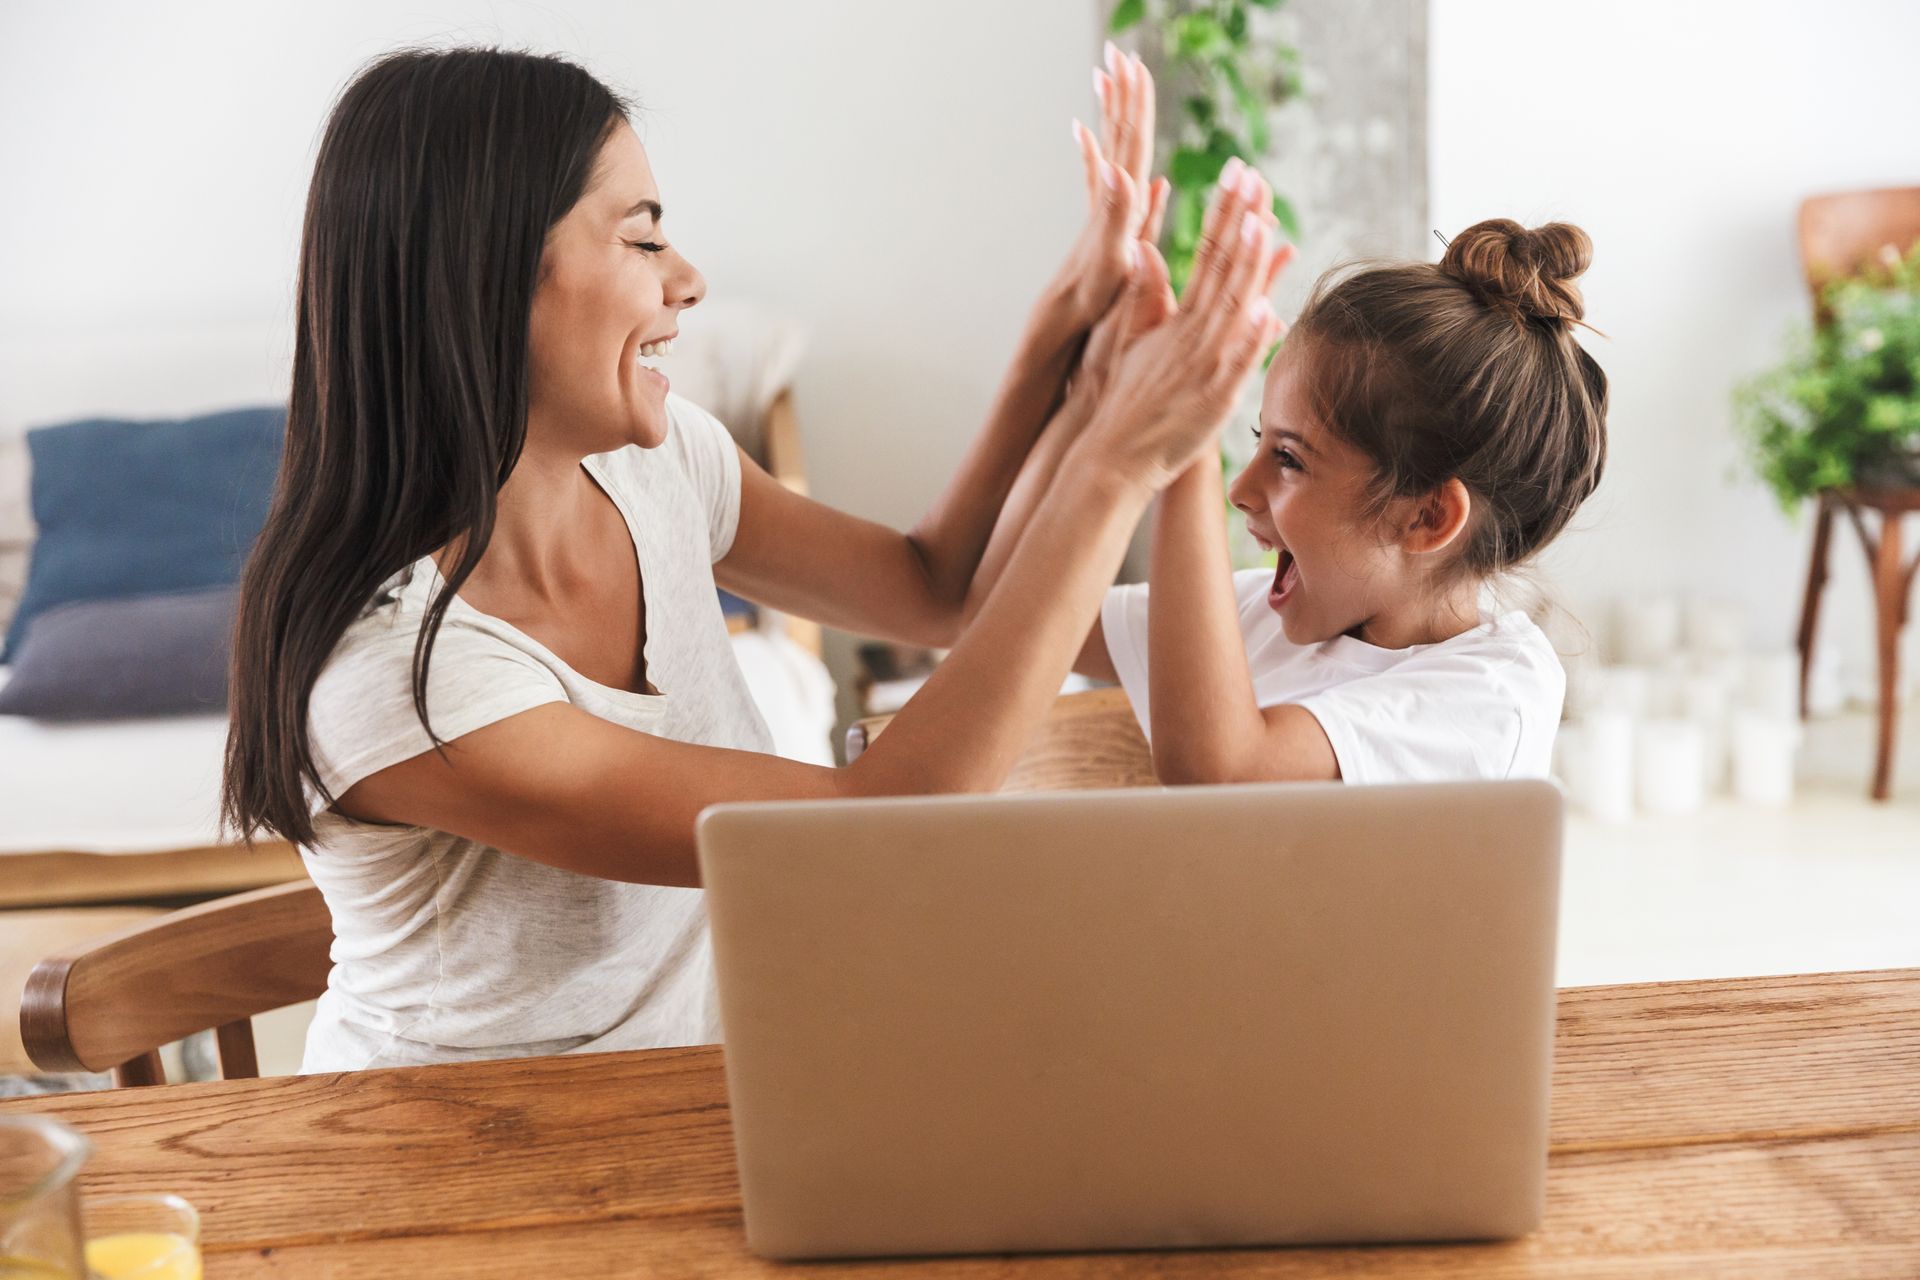 a woman and a little girl are giving each other a high five while sitting at a table with a laptop